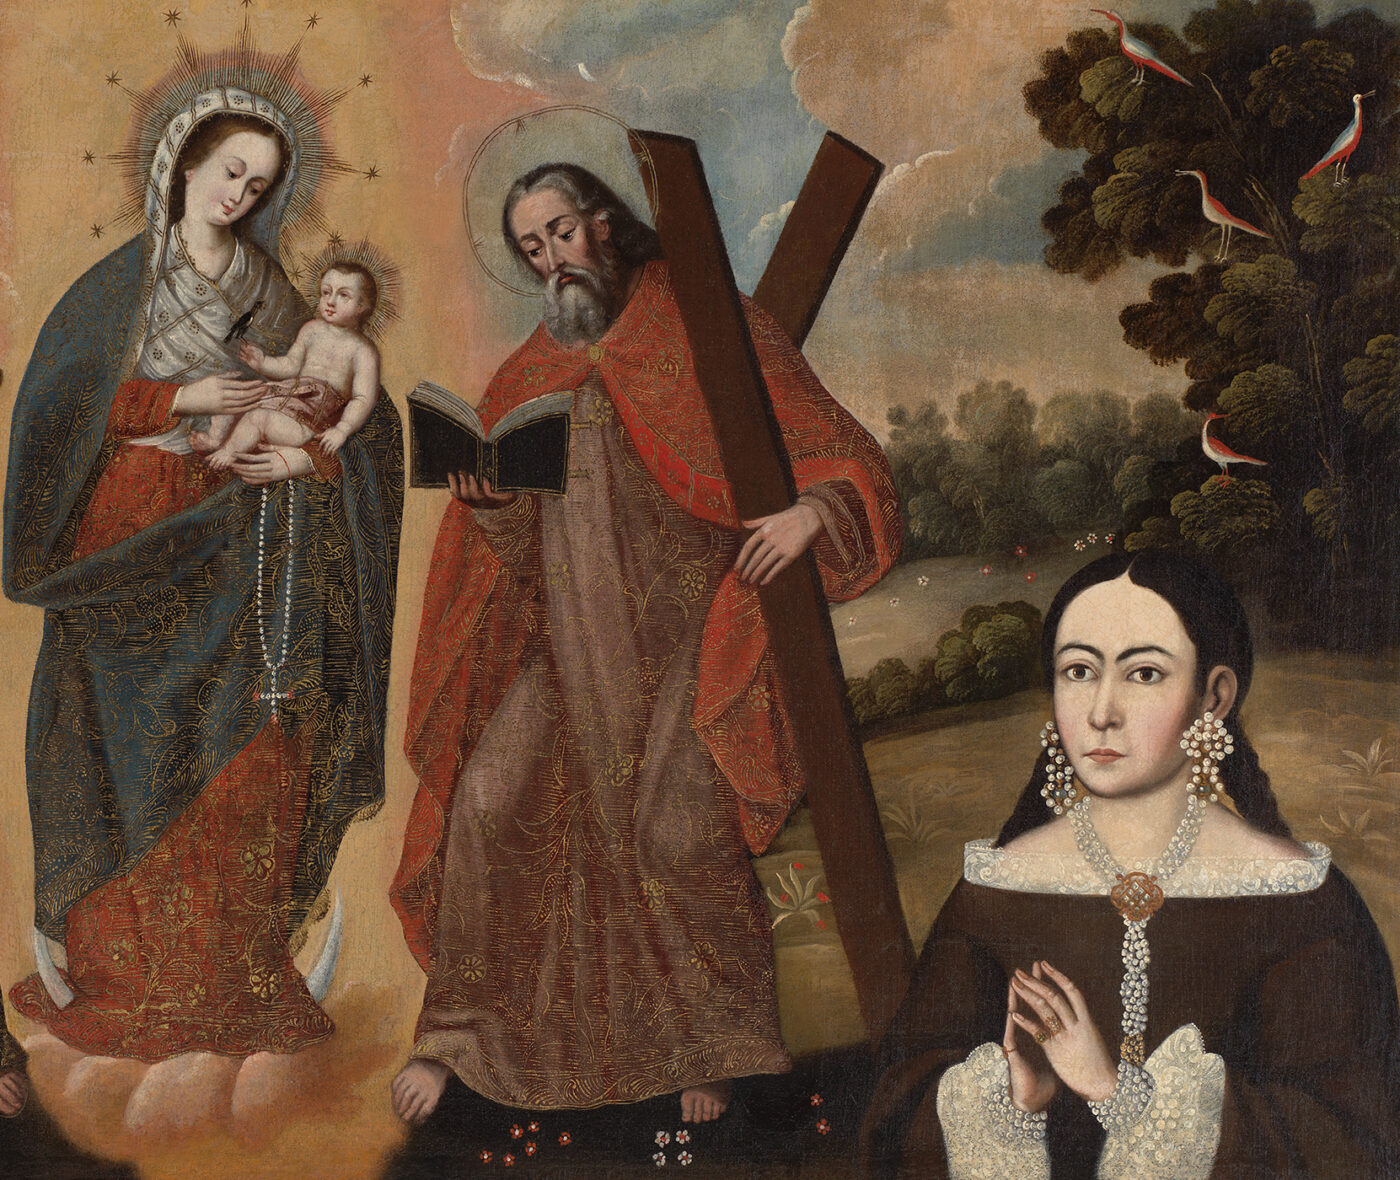 A landscape painting detail where Our Lady of the Rosary stands with Saint Anthony of Padua, holding a book with the figure of the Christ Child standing on it at the center, and a portrait of a woman with dark hair wearing pearls appears at bottom right.